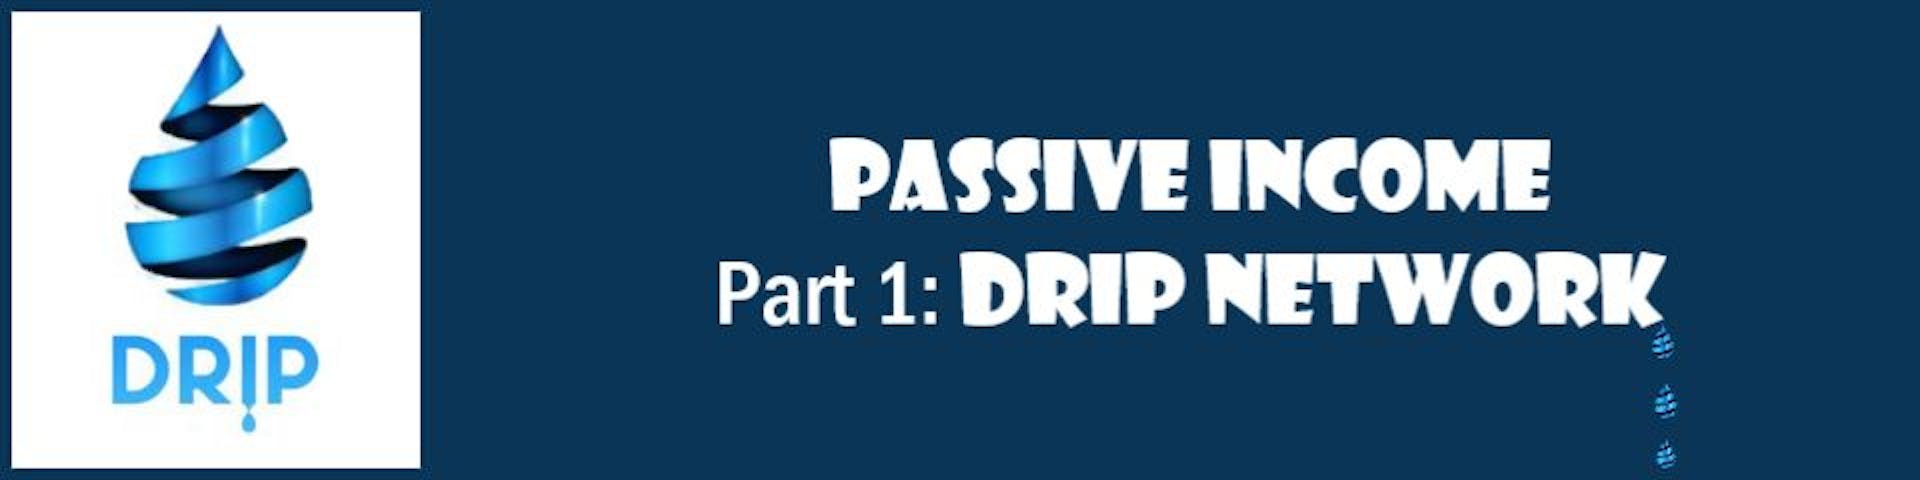 featured image - Passive Income Part 1: Drip Network